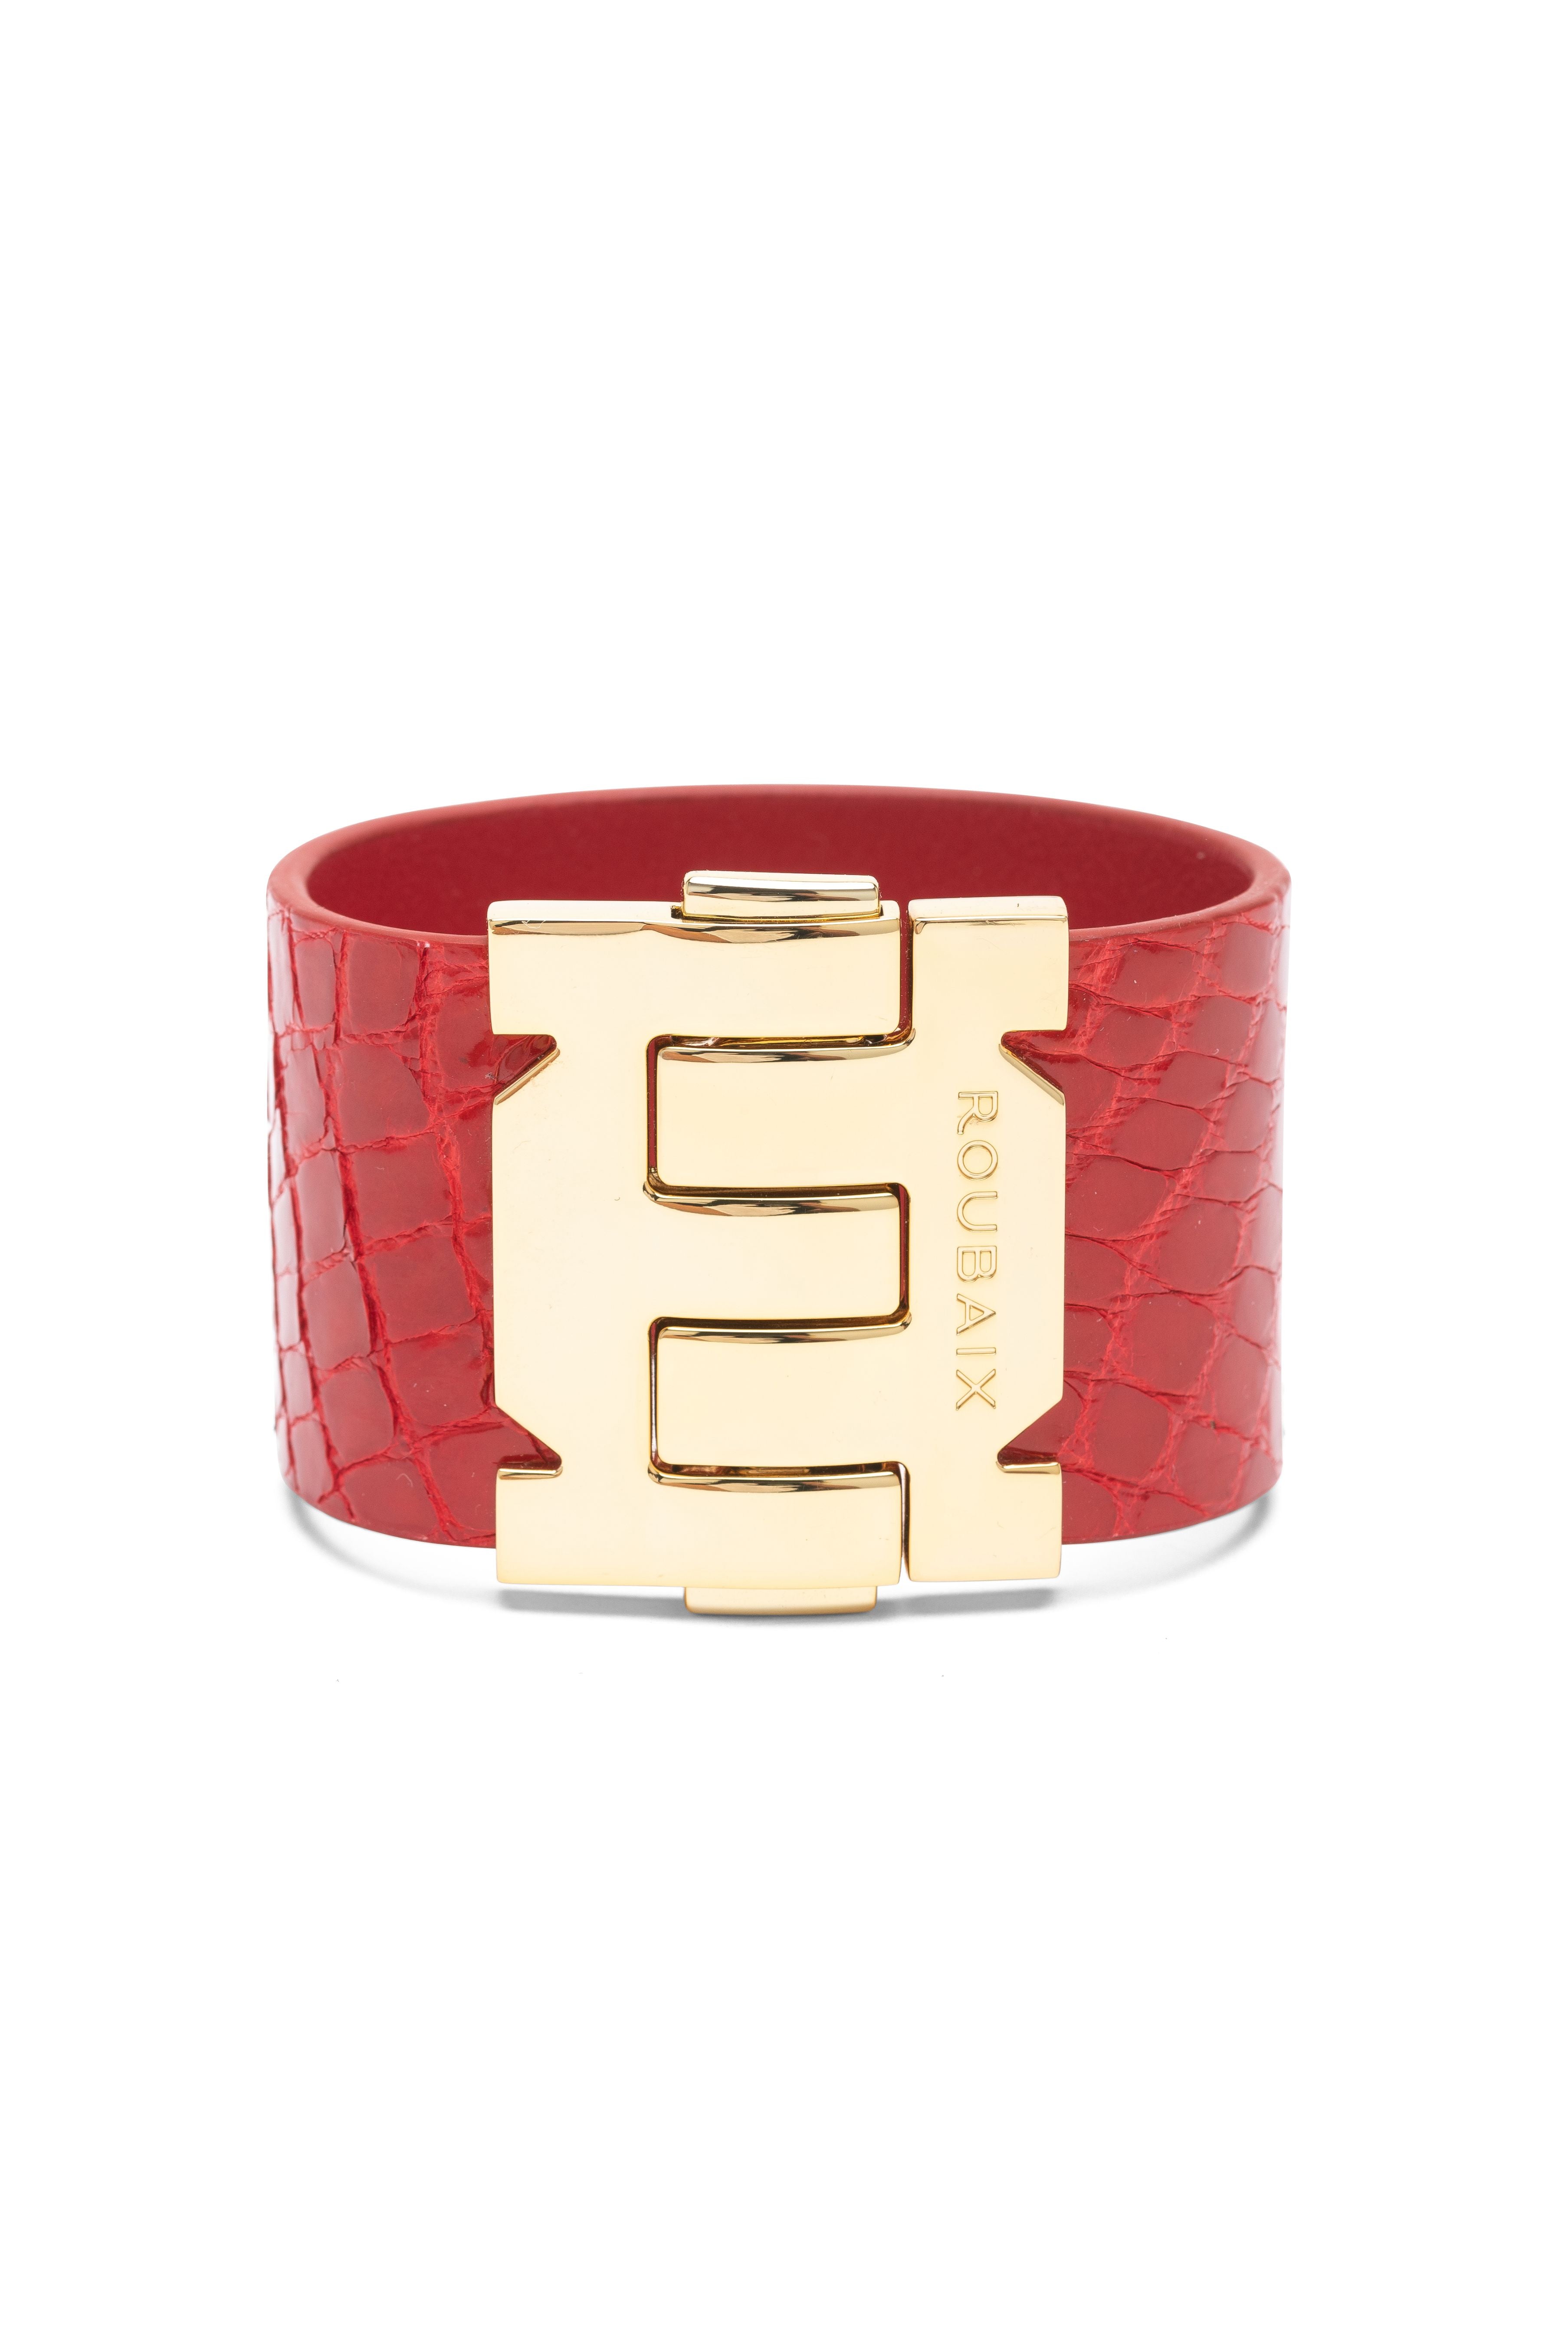 Kimball Cuff Bracelet - Red